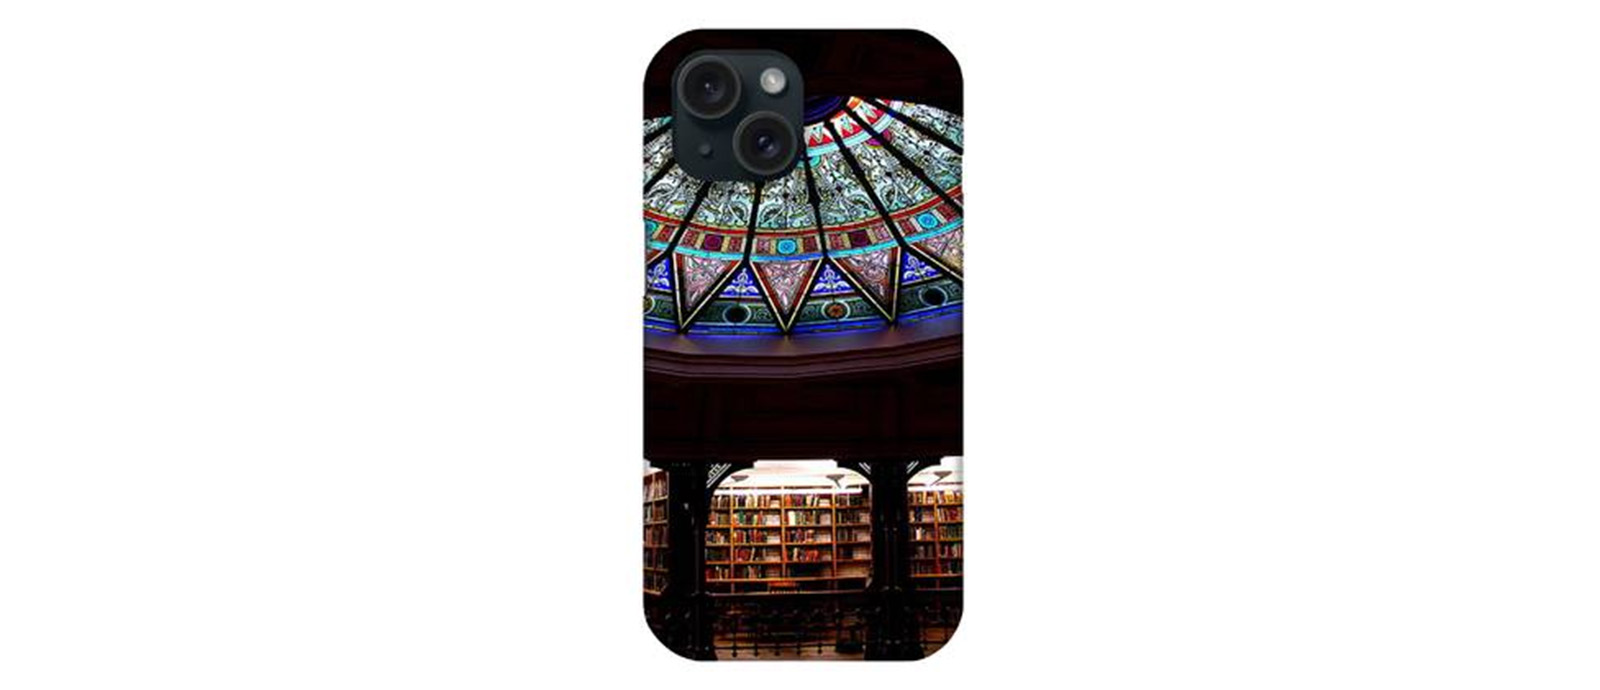 The back of an Iphone case with Linderman Library rotunda printed on it